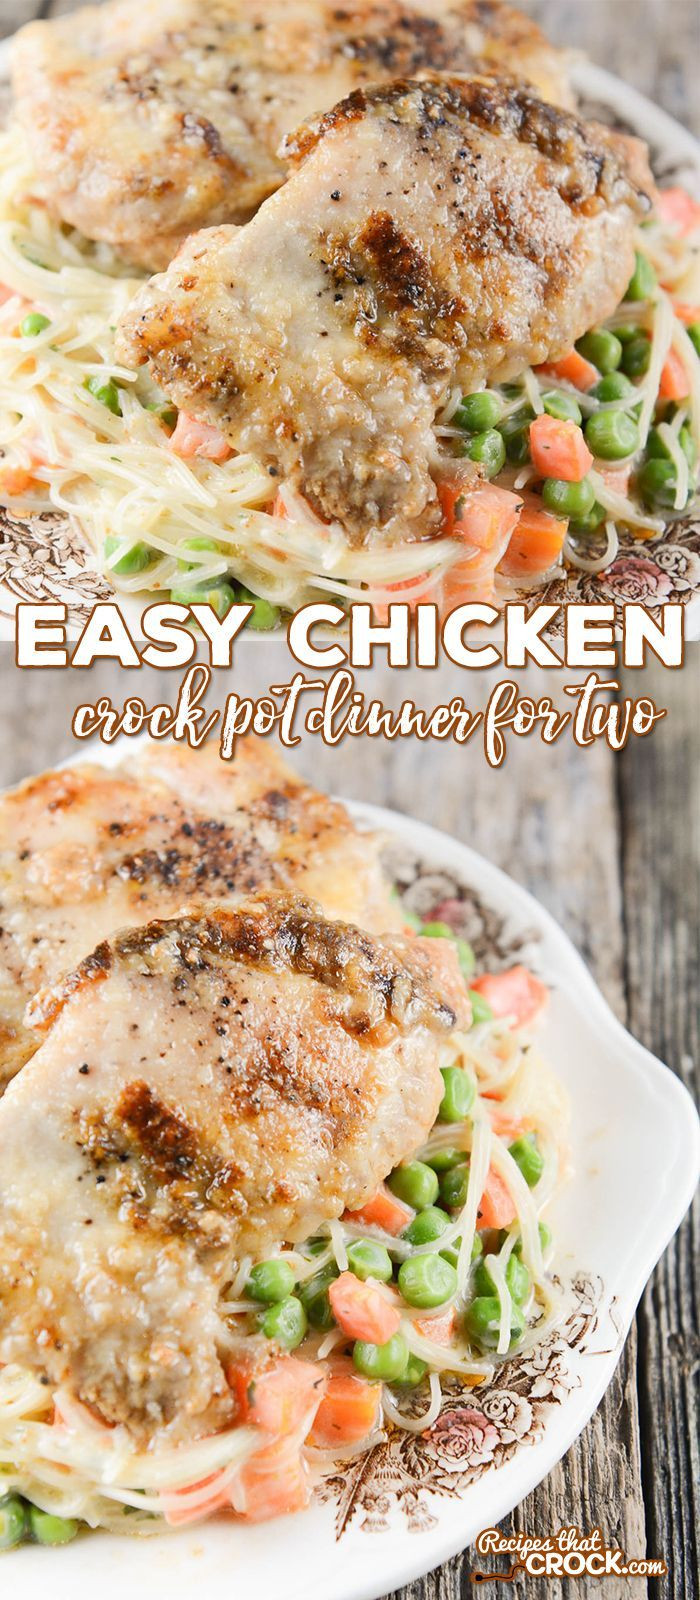 Chicken Crockpot Recipes For Kids
 This is an incredibly easy chicken crock pot dinner for